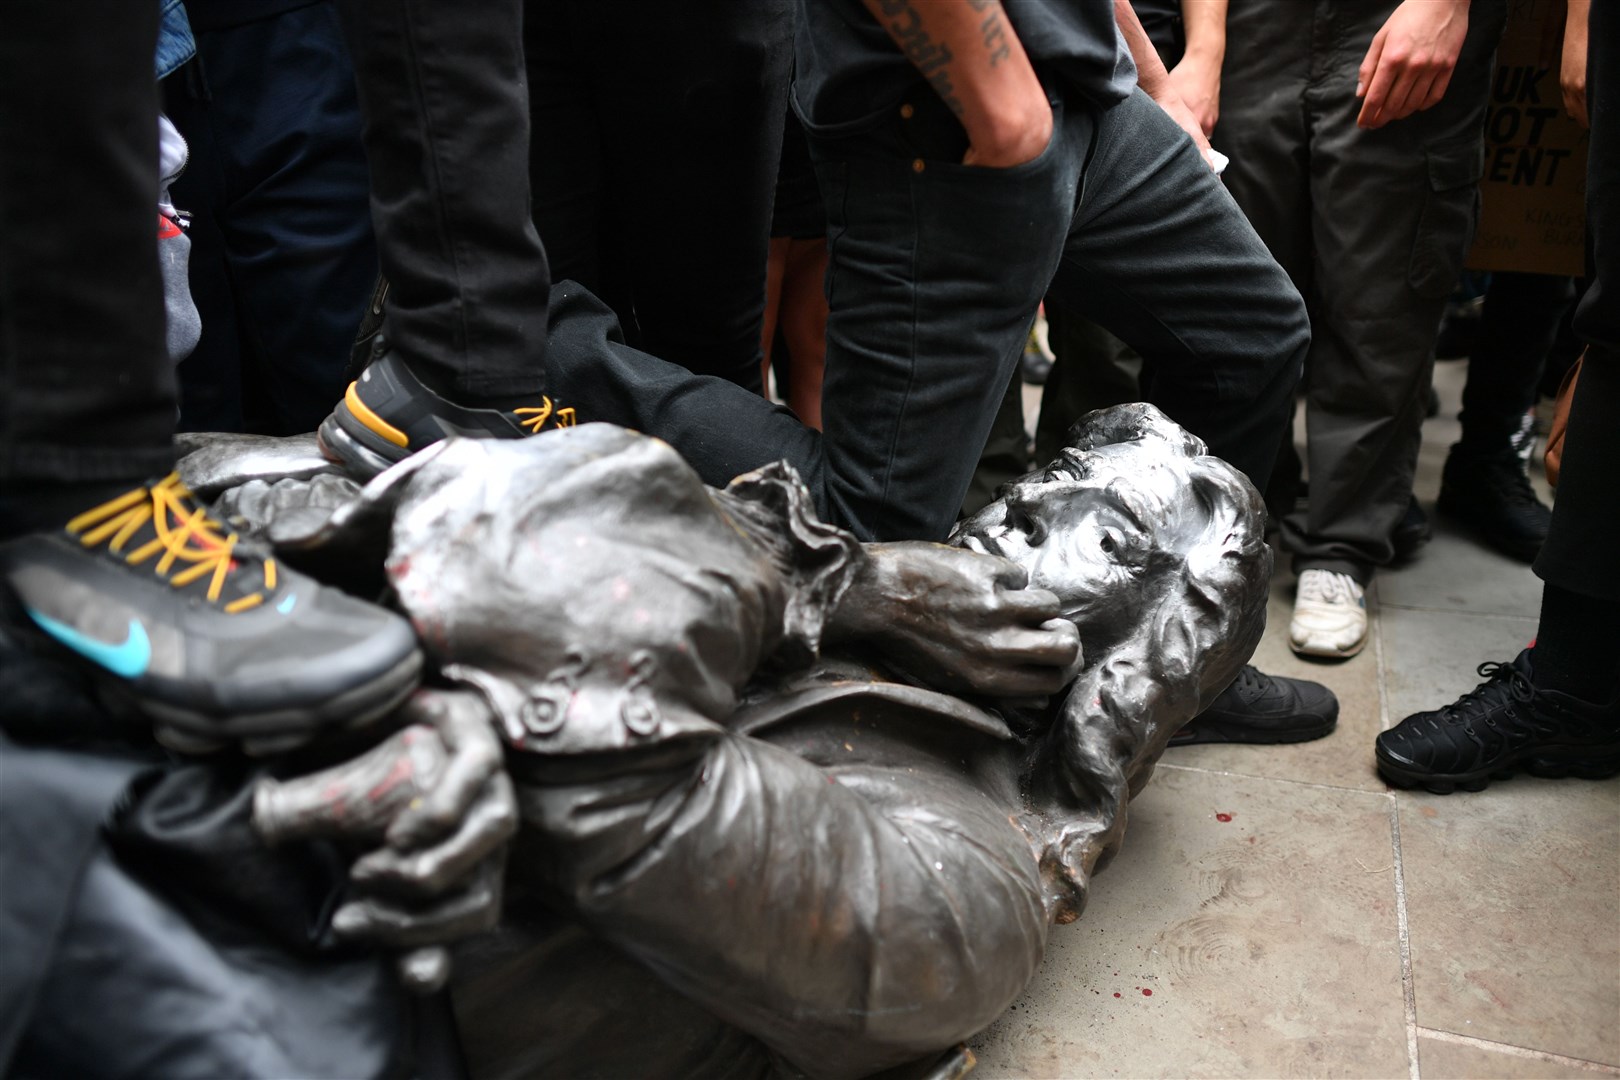 The Edward Colston statue at the feet of protesters (Ben Birchall/PA)